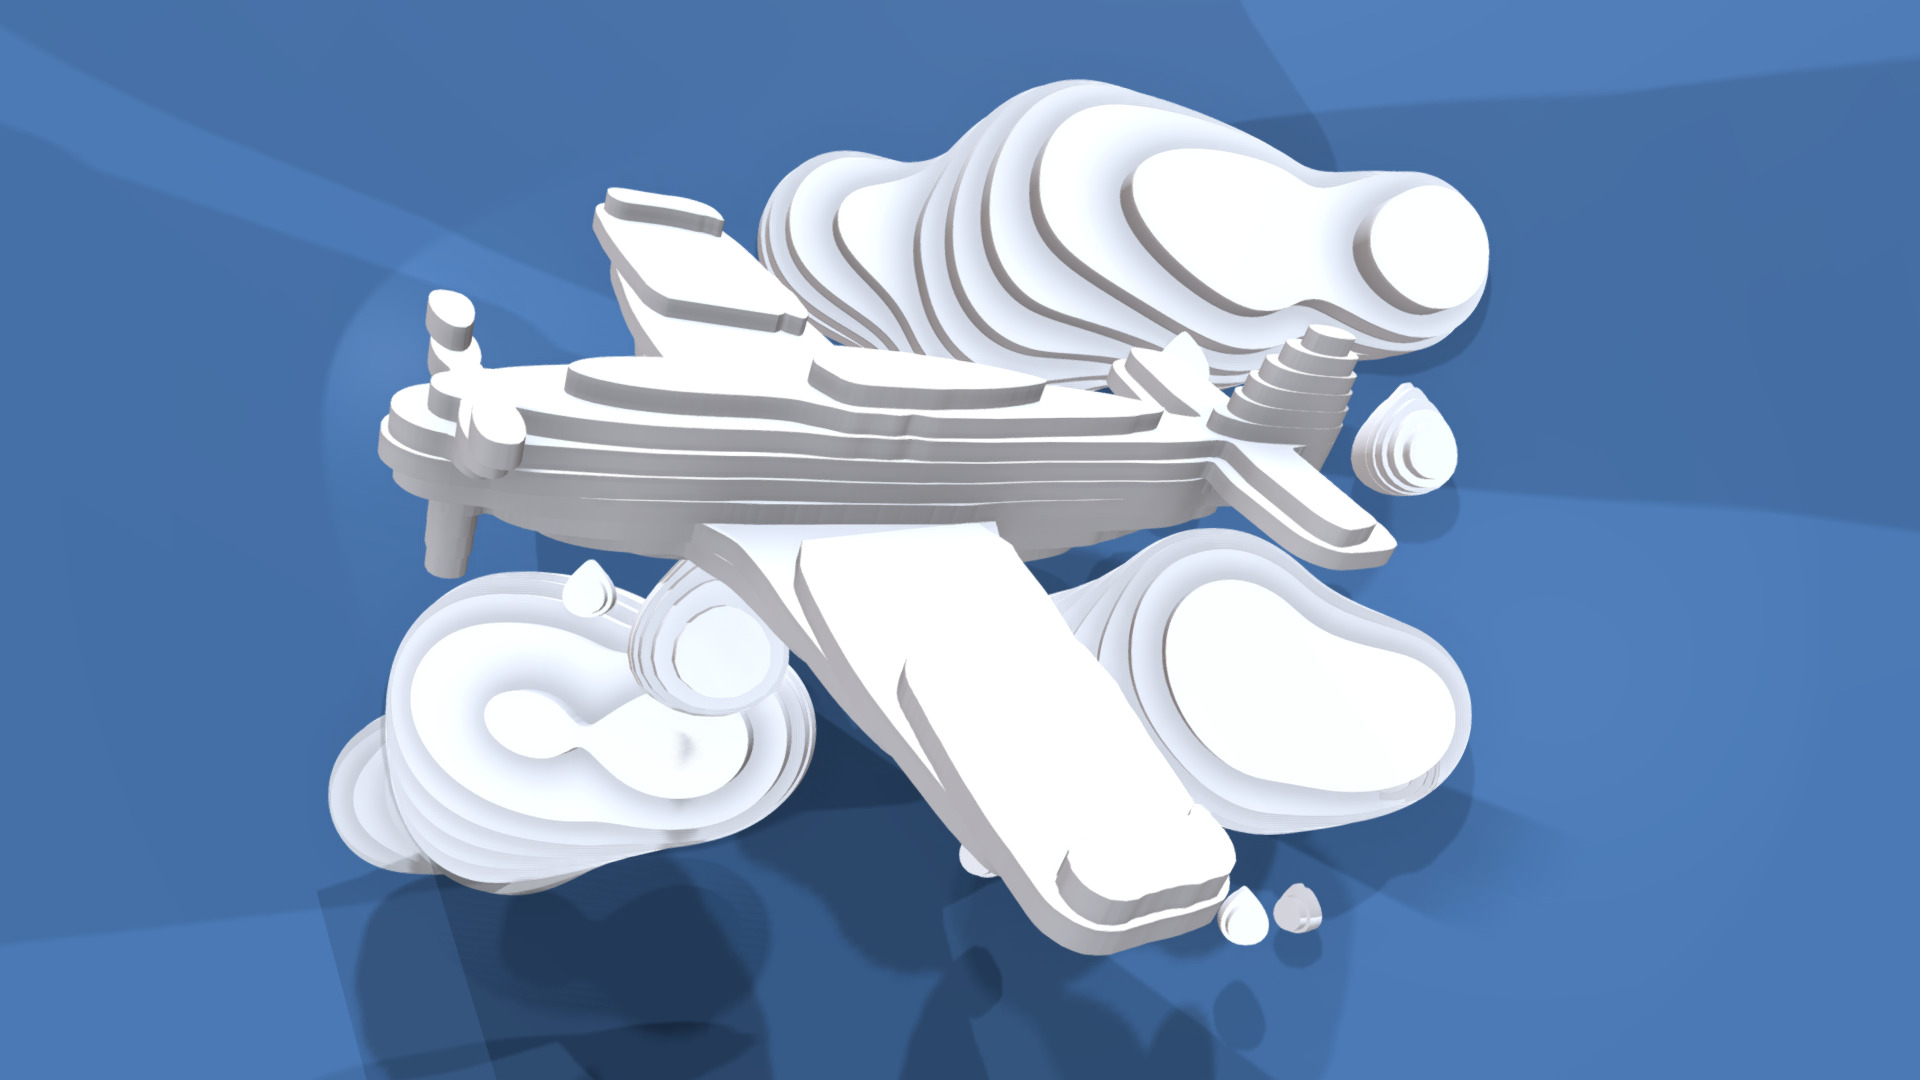 3D model PLANE and CLOUD on blue baground - This is a 3D model of the PLANE and CLOUD on blue baground. The 3D model is about logo.